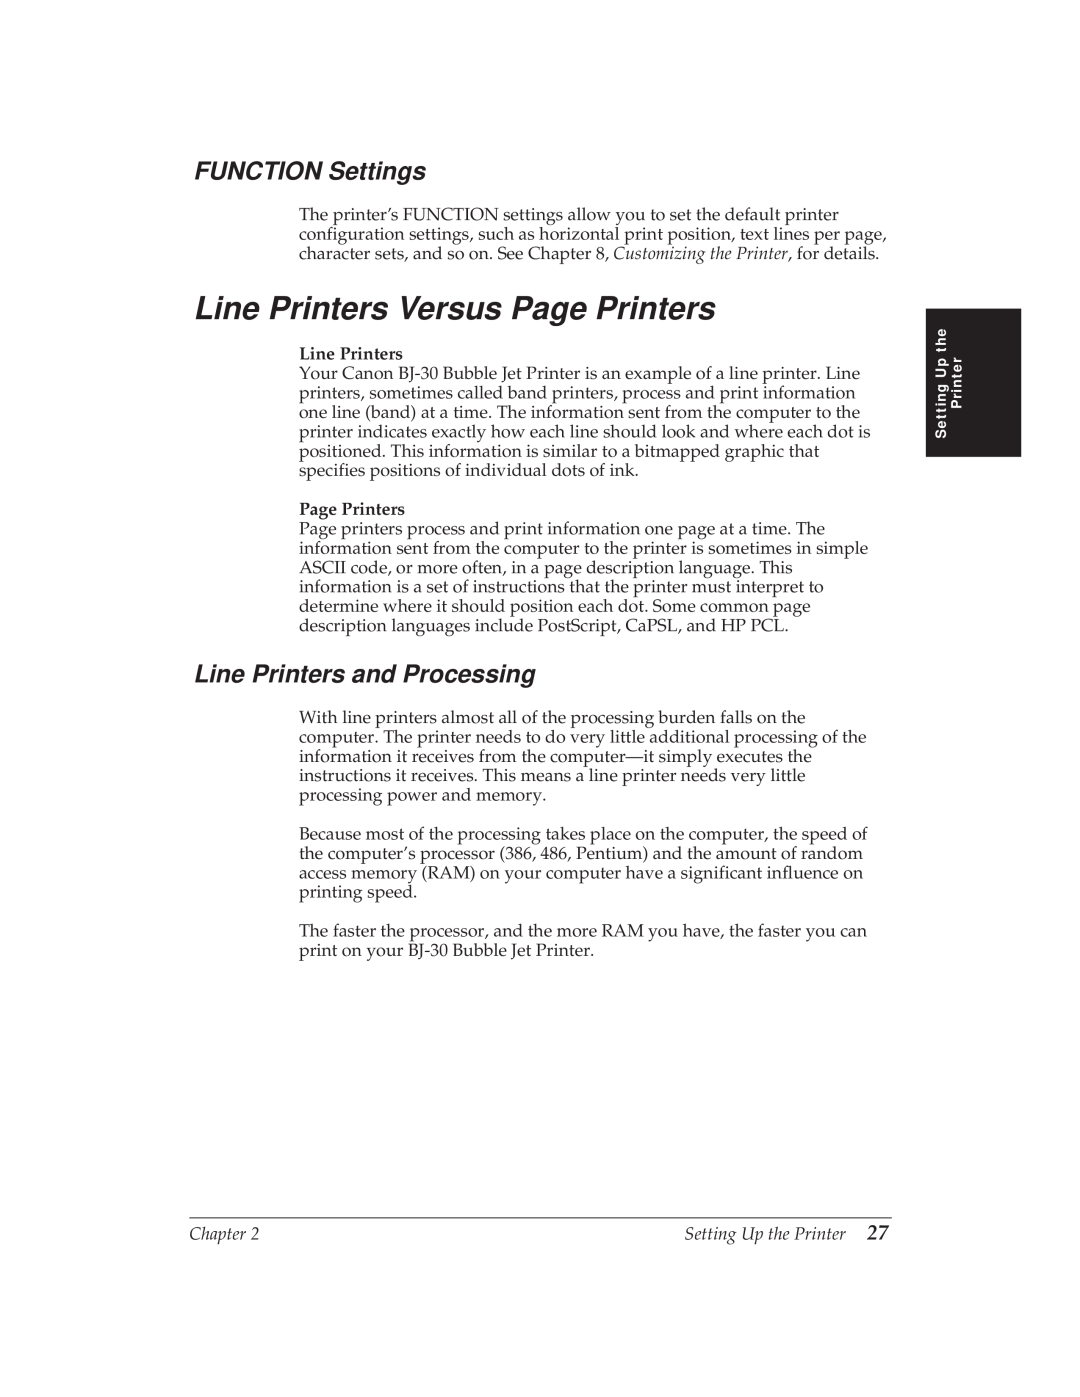 Canon BJ-30 manual Line Printers Versus Page Printers, FUNCTION Settings, Line Printers and Processing 